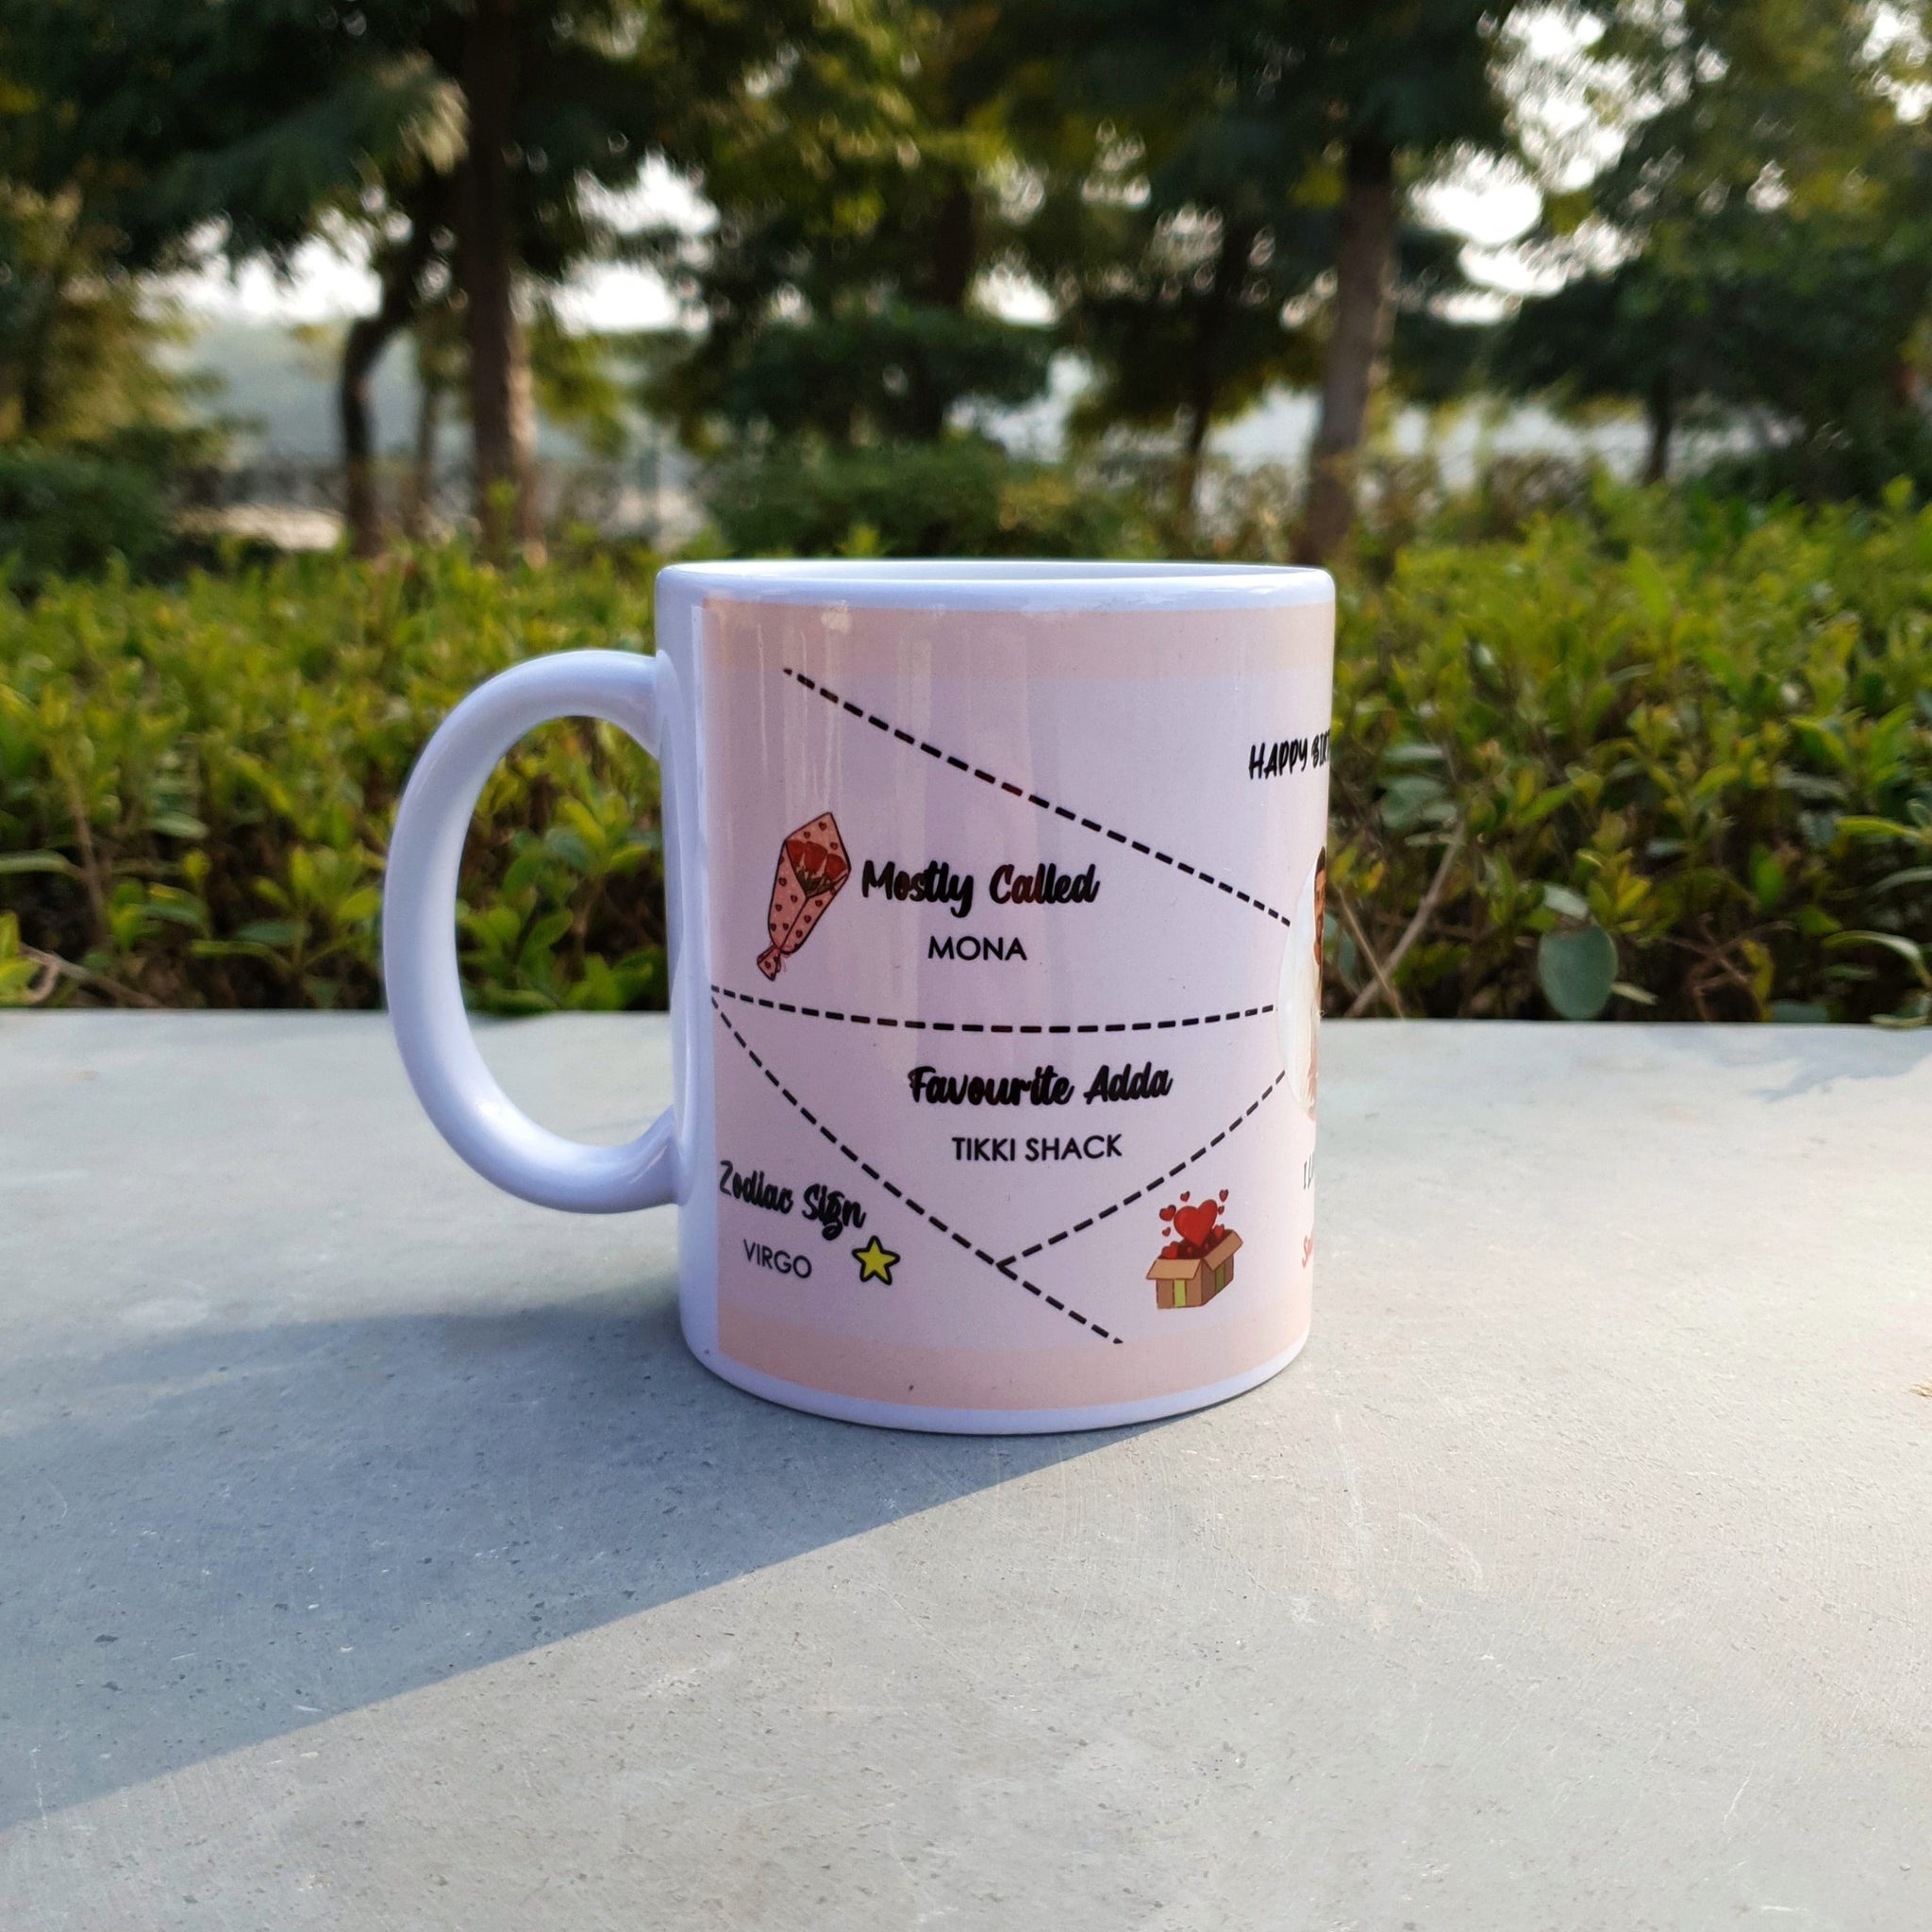 All About You Personalized Mug